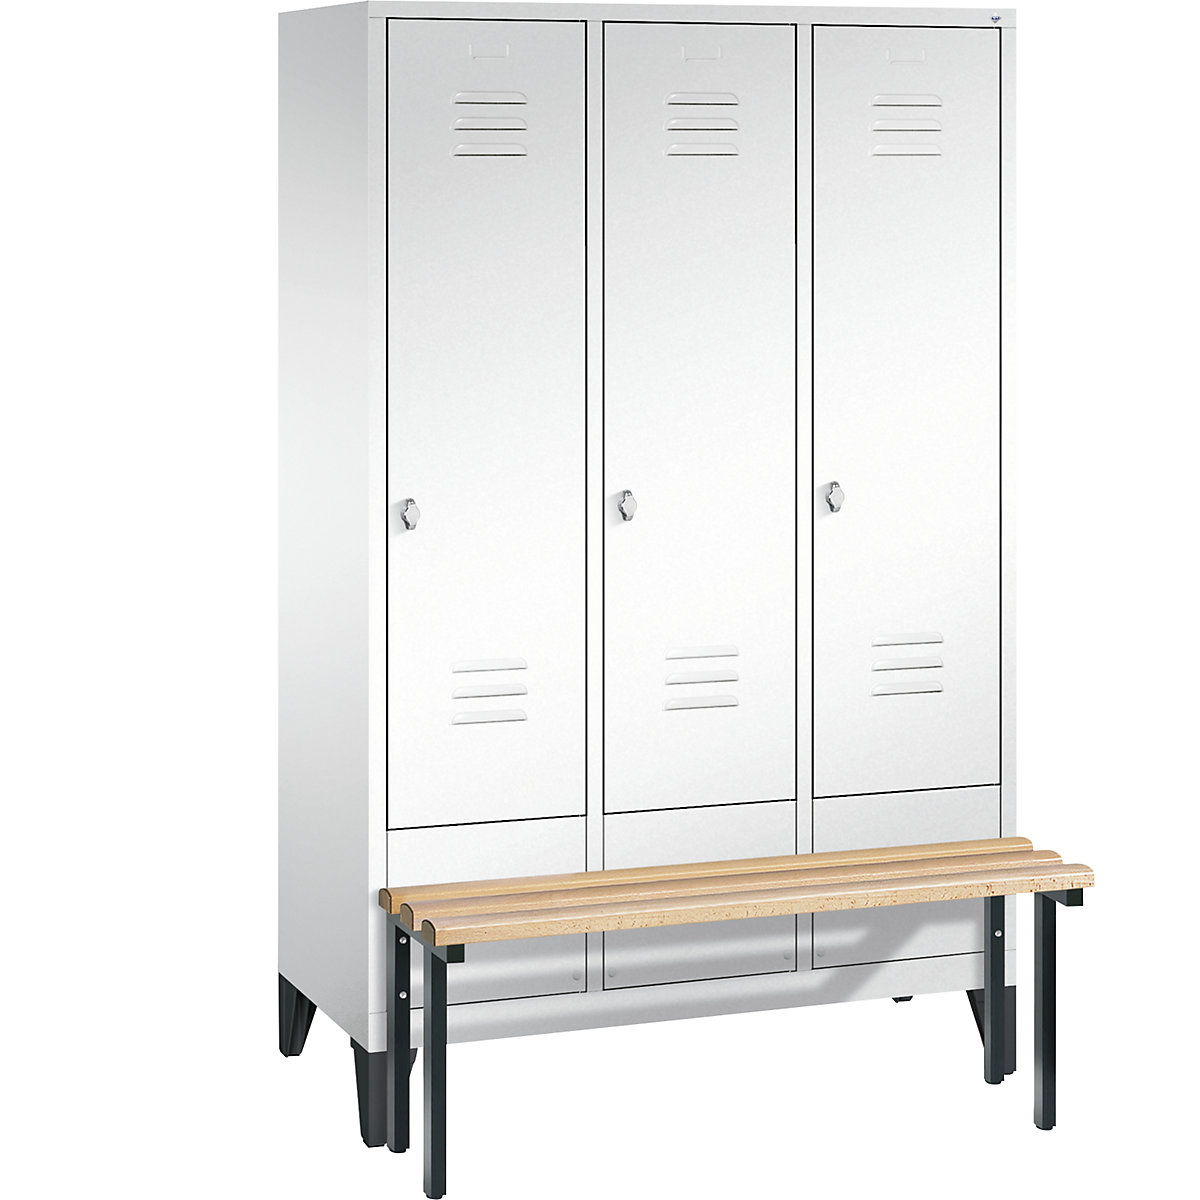 CLASSIC cloakroom locker with bench mounted in front – C+P, 3 compartments, compartment width 400 mm, traffic white-10